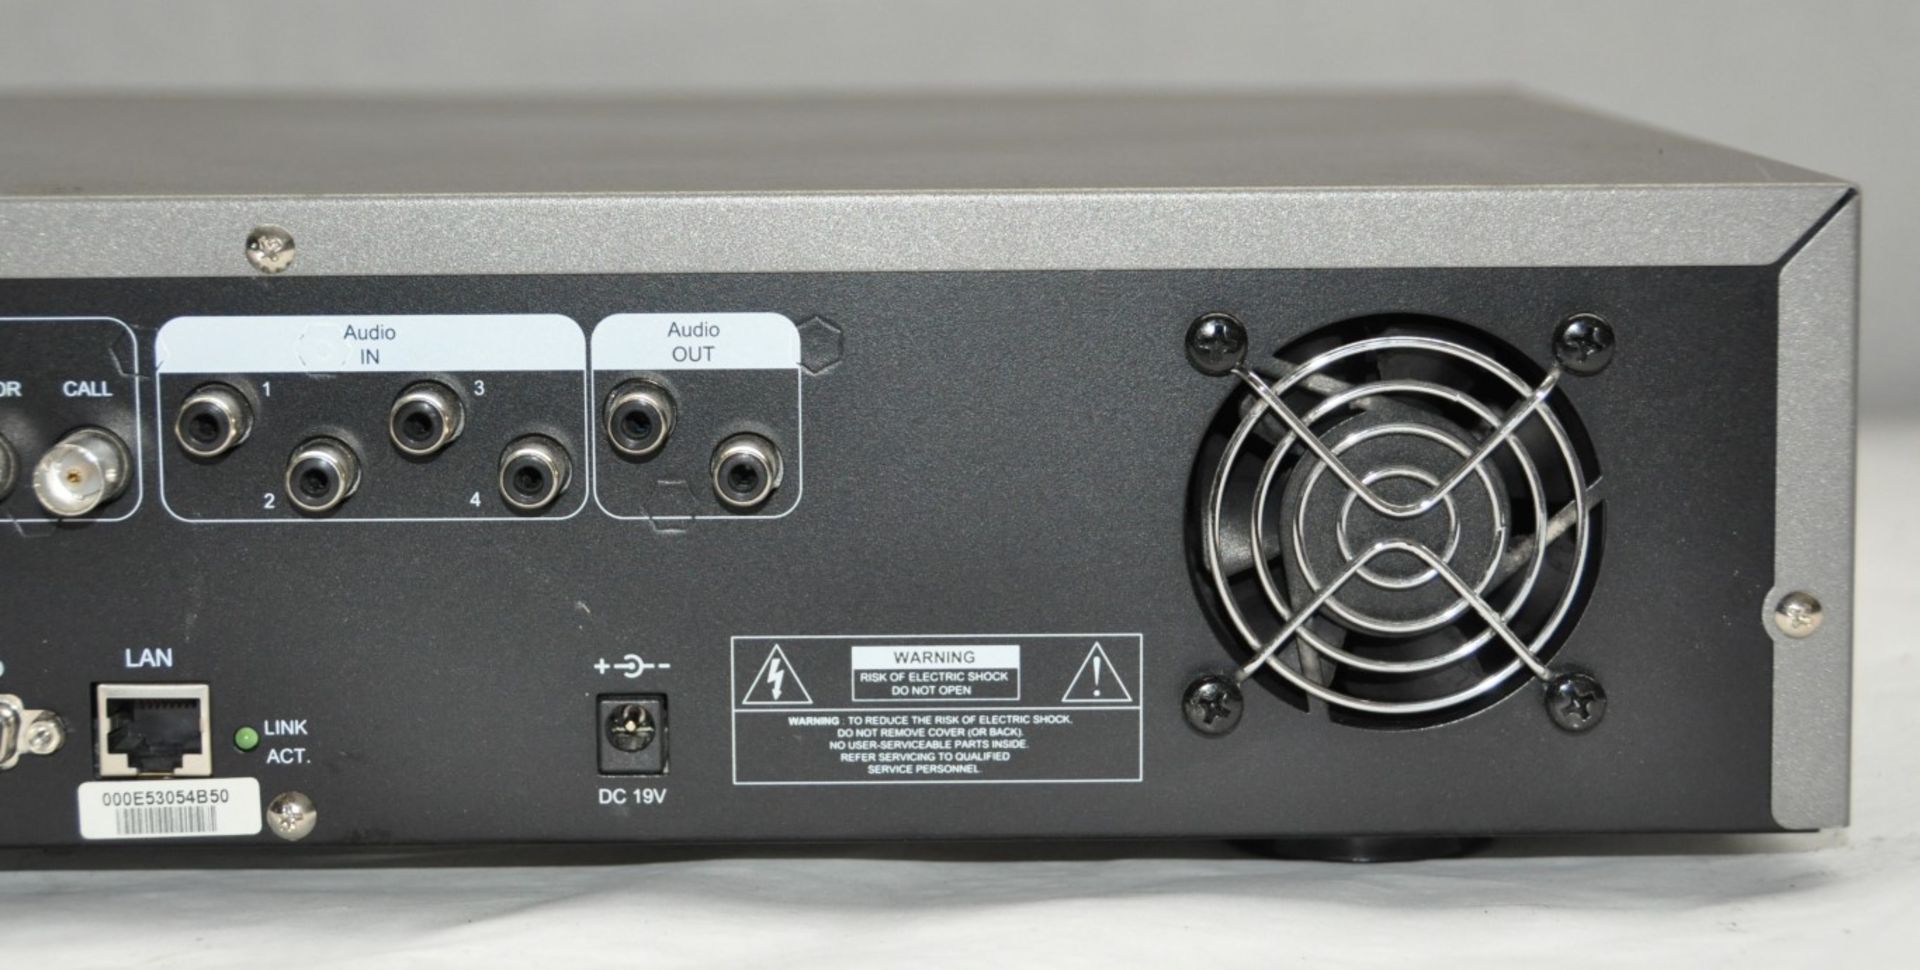 1 x Ganz 4 Channel MPEG DVR CCTV Digital Video Recorder - CL101 - Removed From a Working Environment - Image 6 of 7